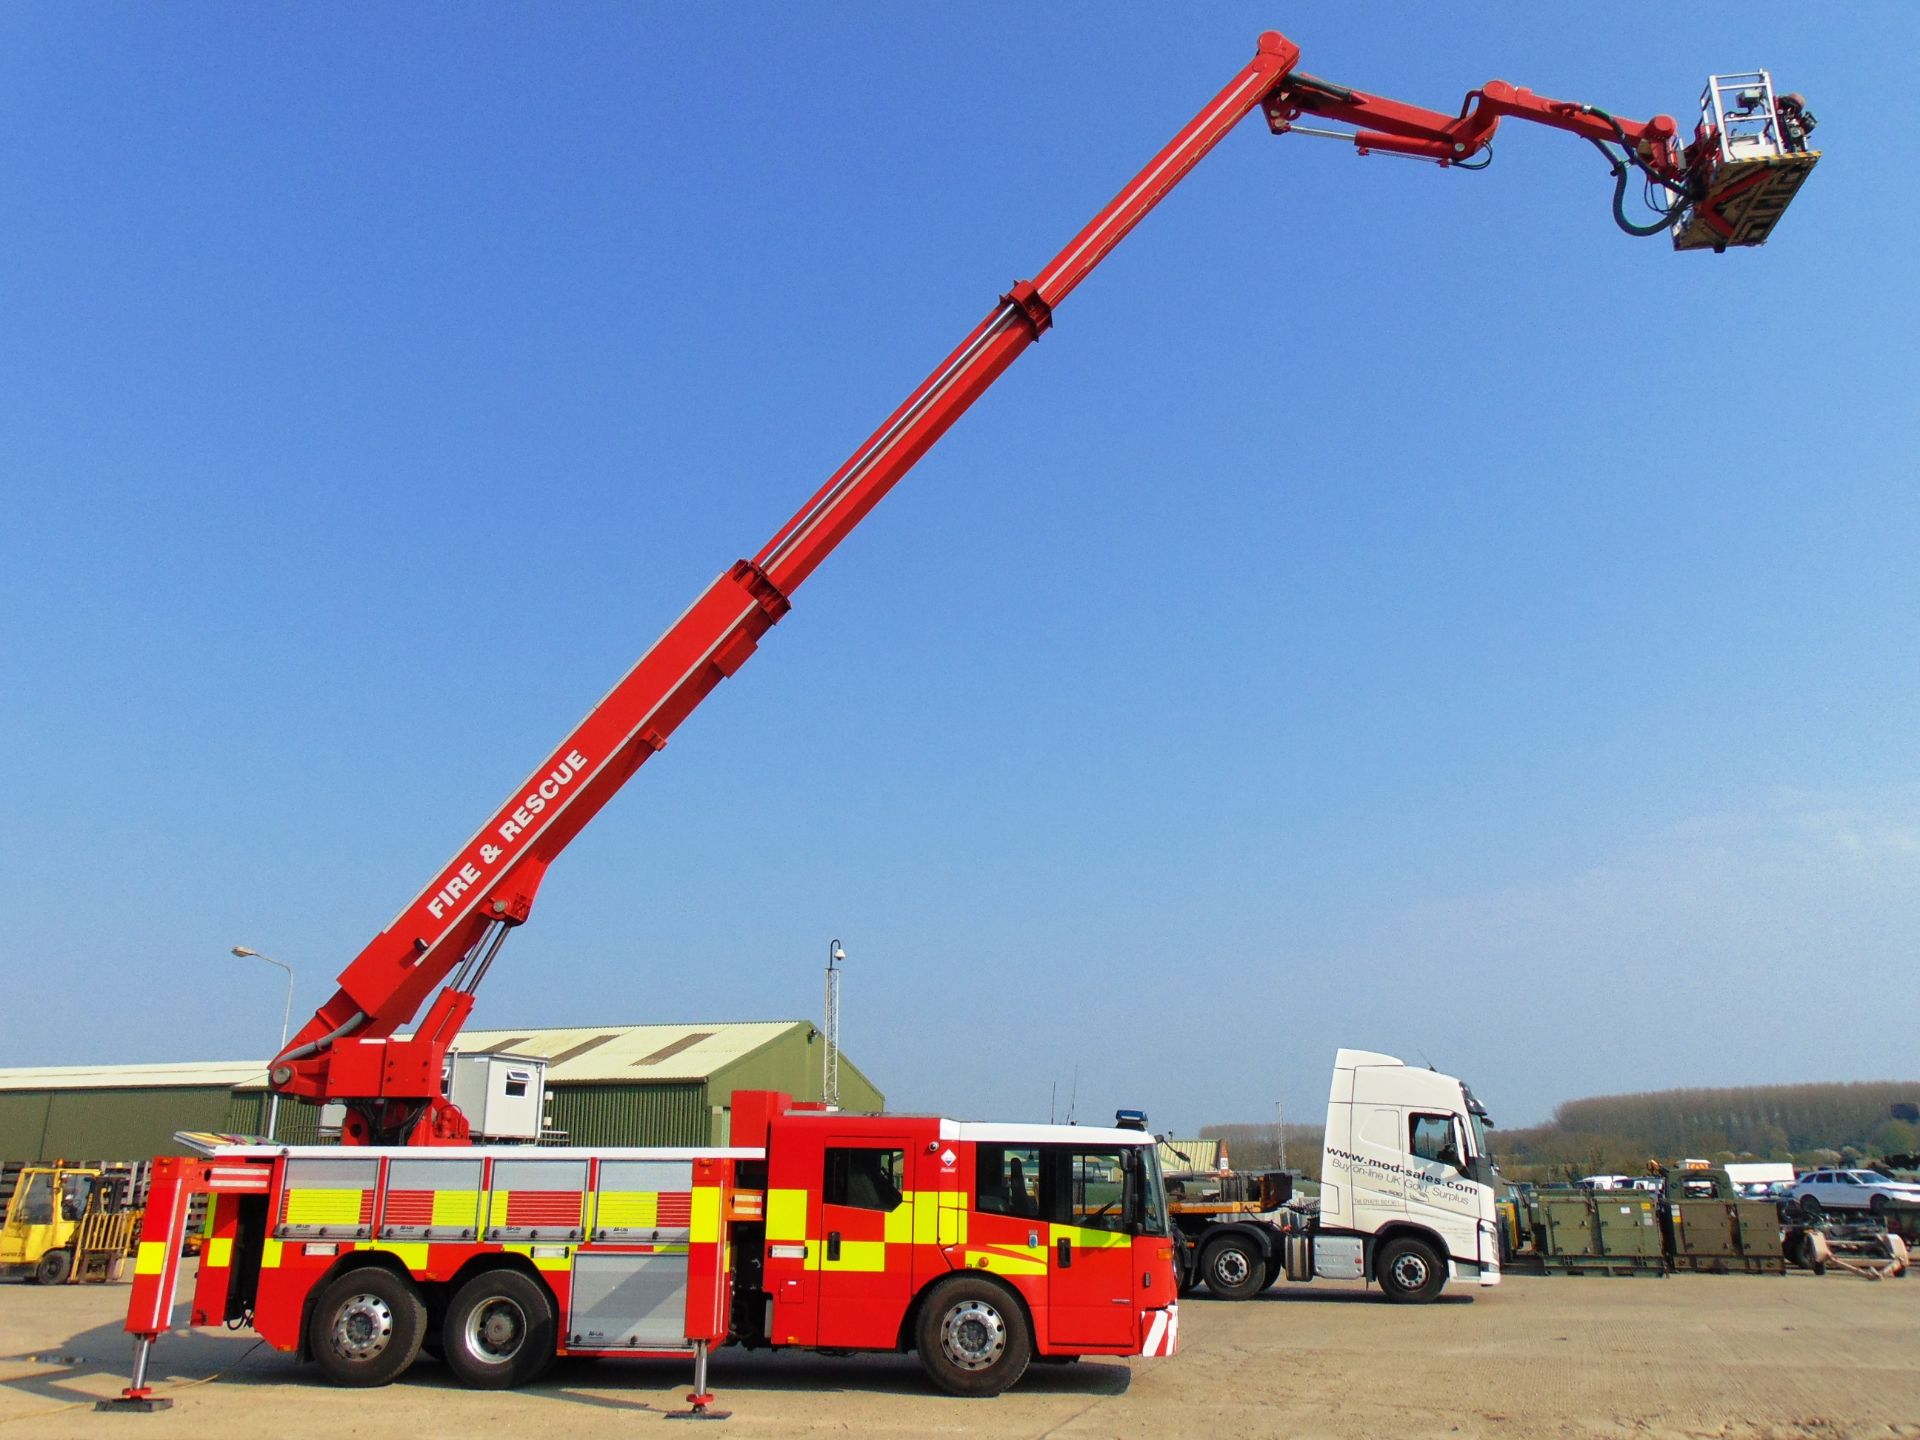 Mercedes Econic 2633 Aerial Rescue Fire Fighting Appliance - Image 5 of 57